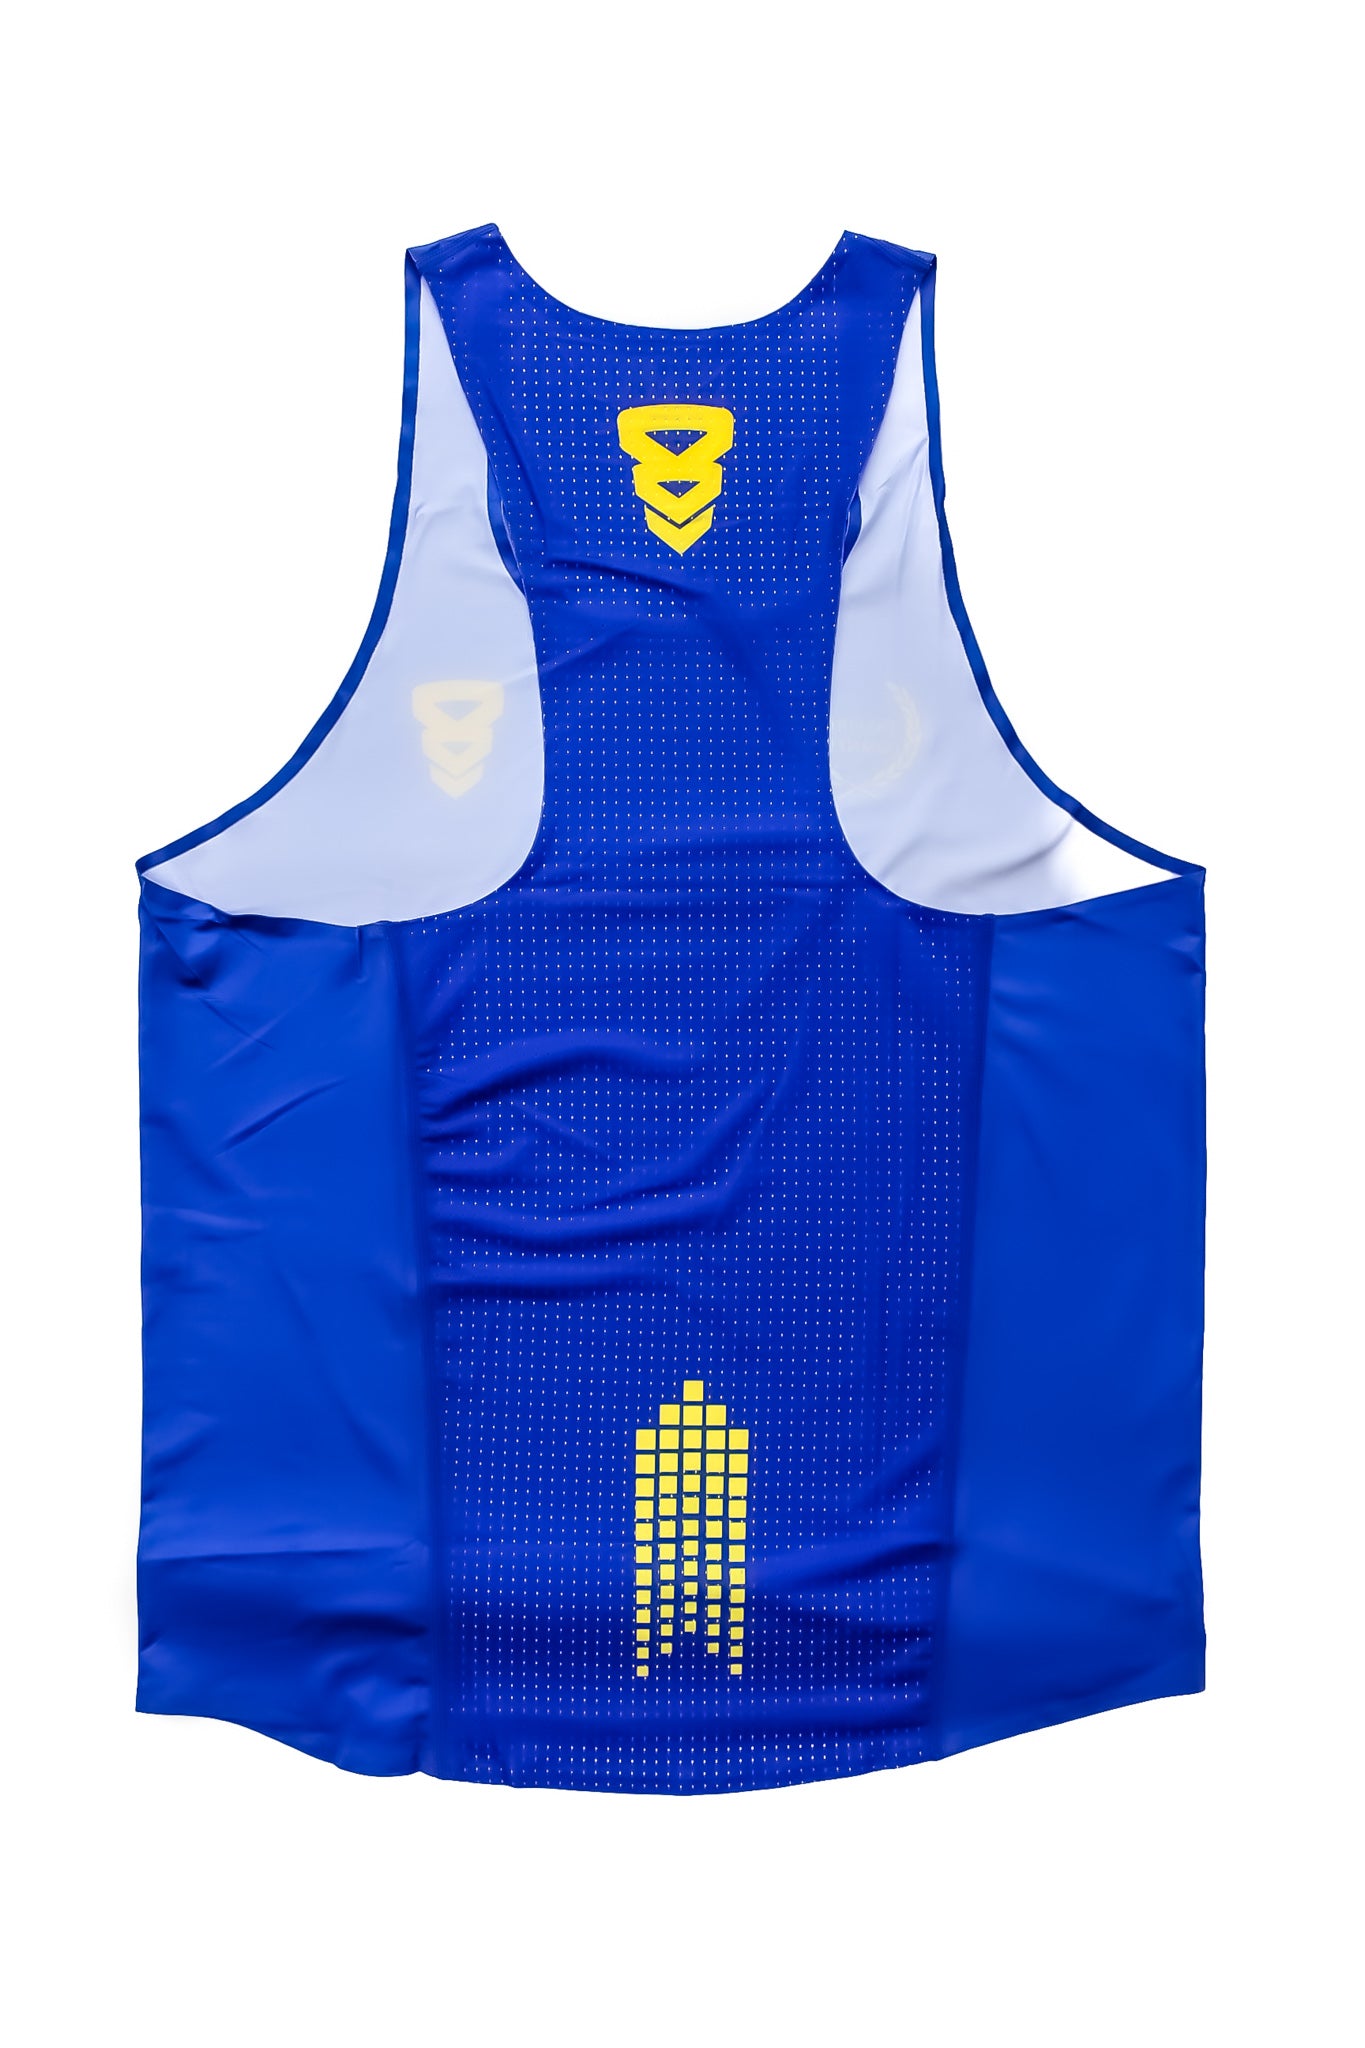 Blue and Yellow Running Singlet